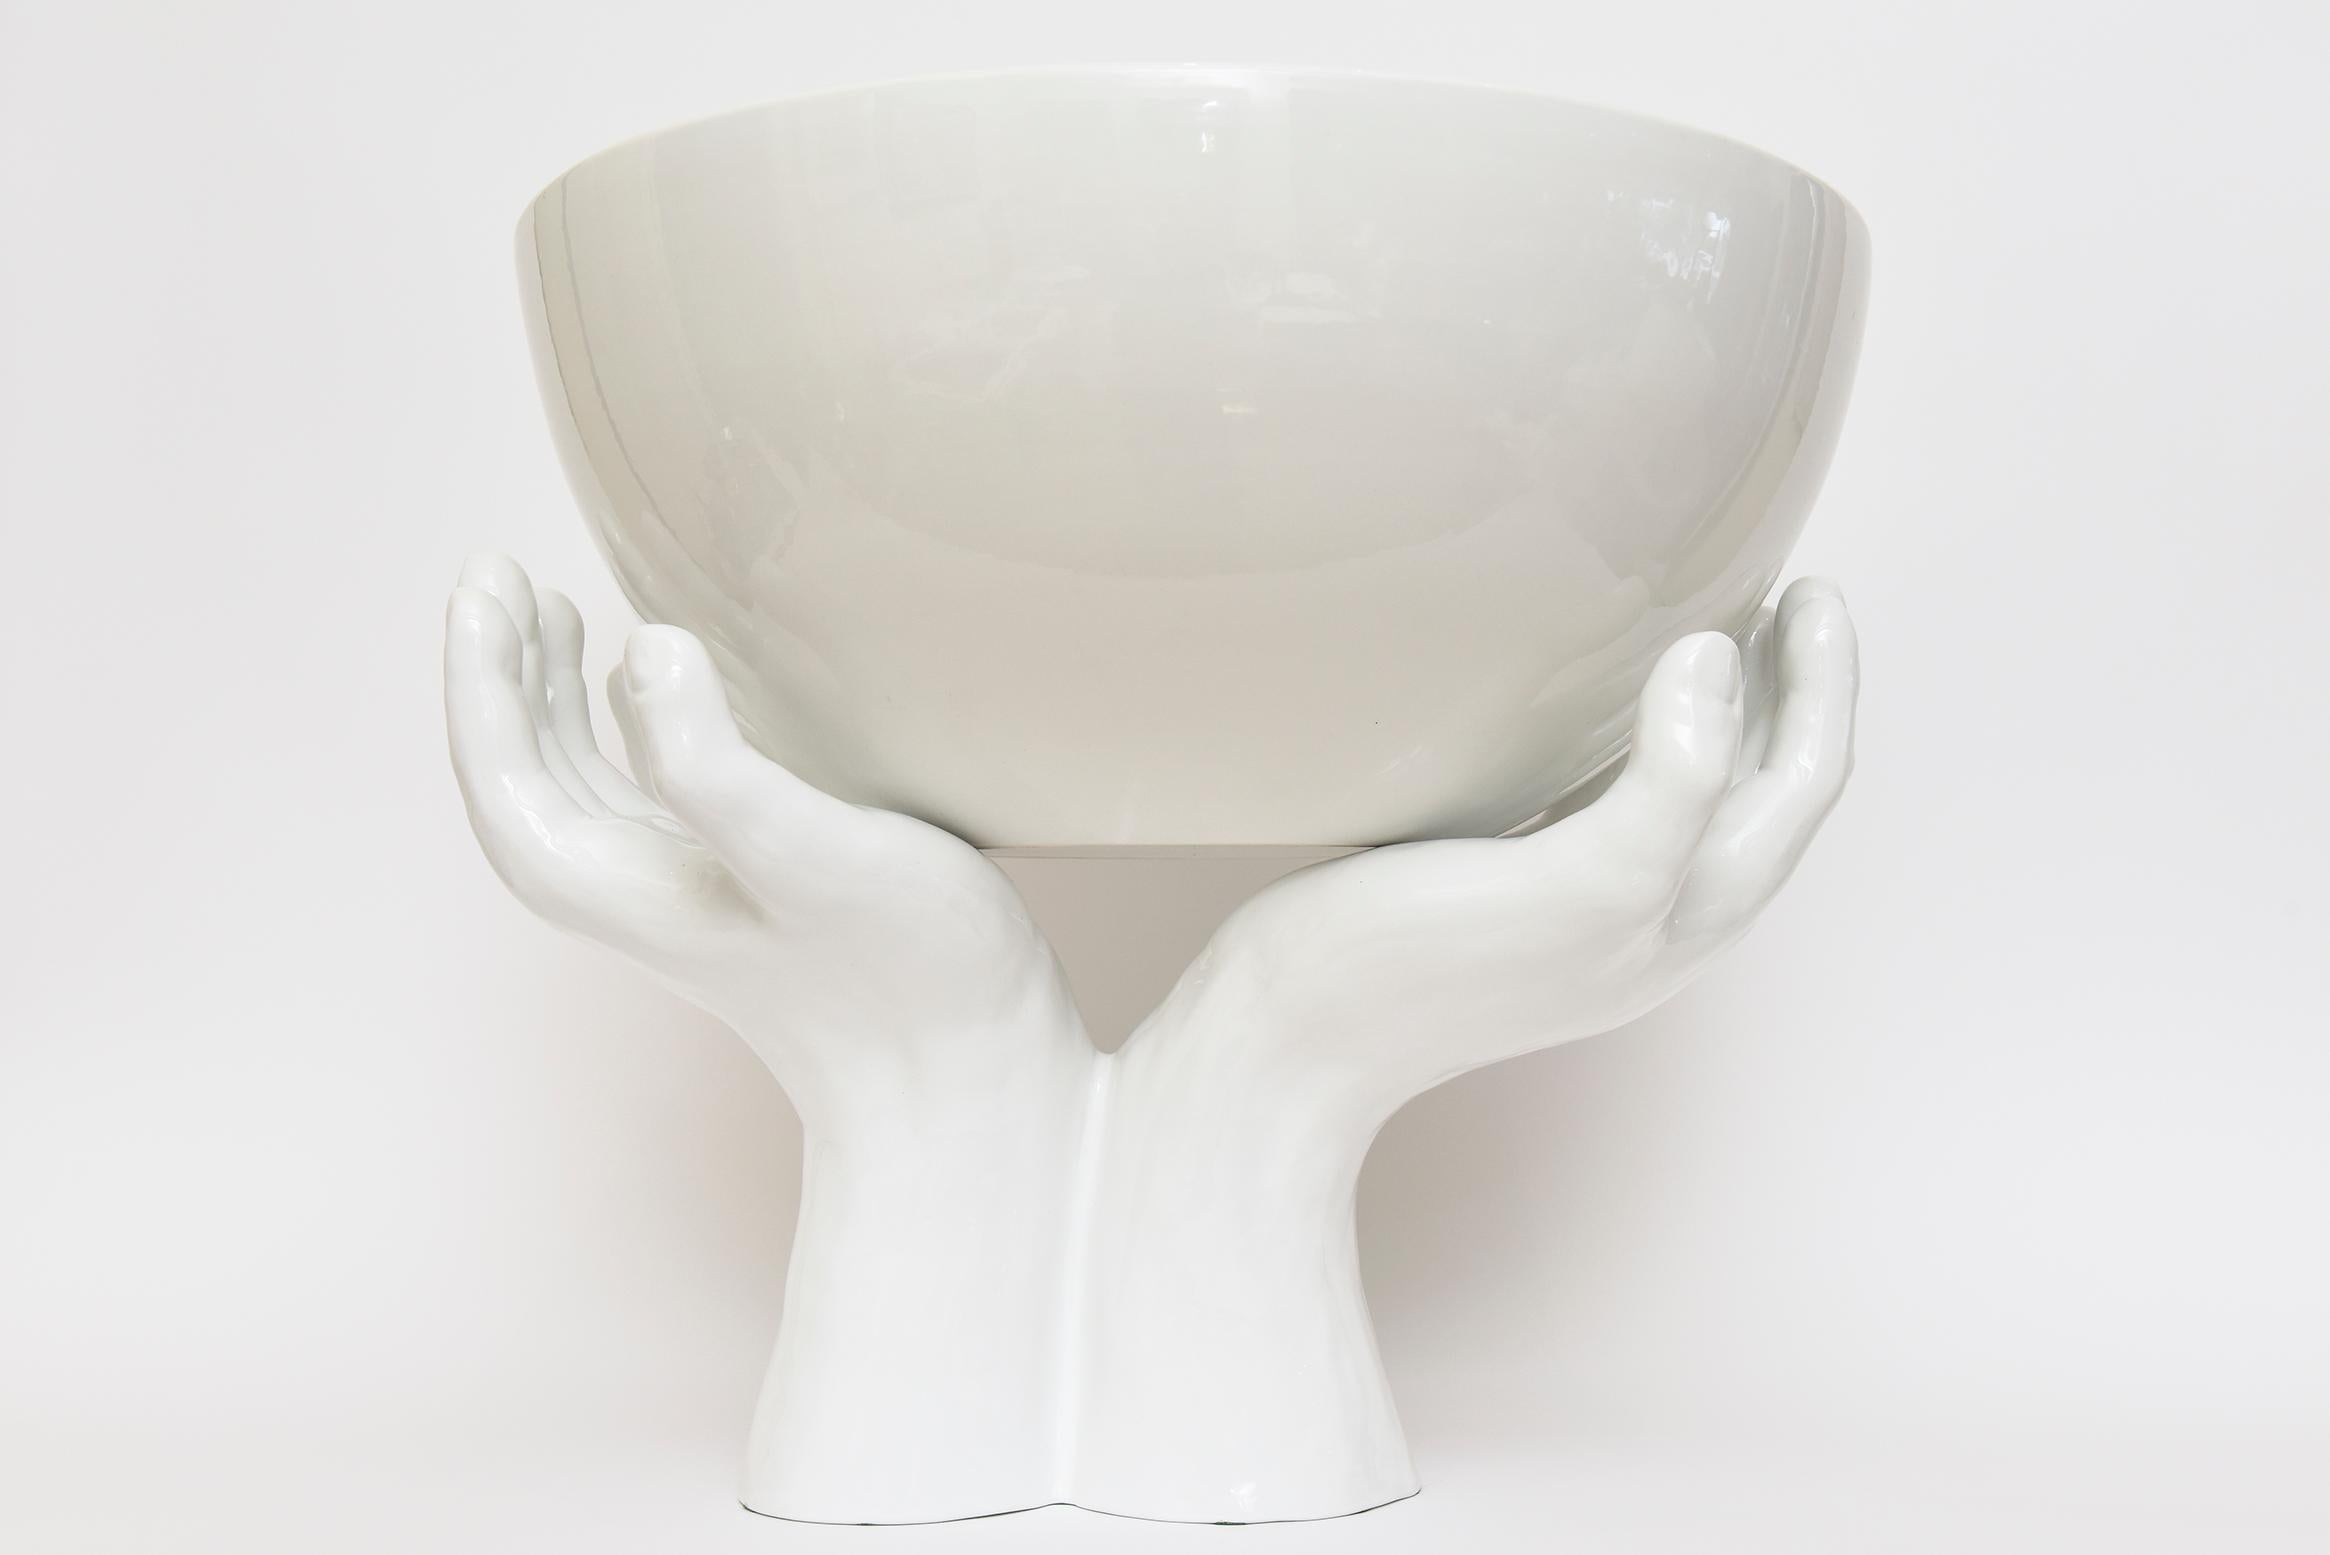 This amazing and very dramatic monumental welcoming 2 part Italian ceramic sculpture is white to off white. The gigantic bowl sits on top of the welcome outstretched hands. We have never ever had this Rare version before and this is from the 70's.